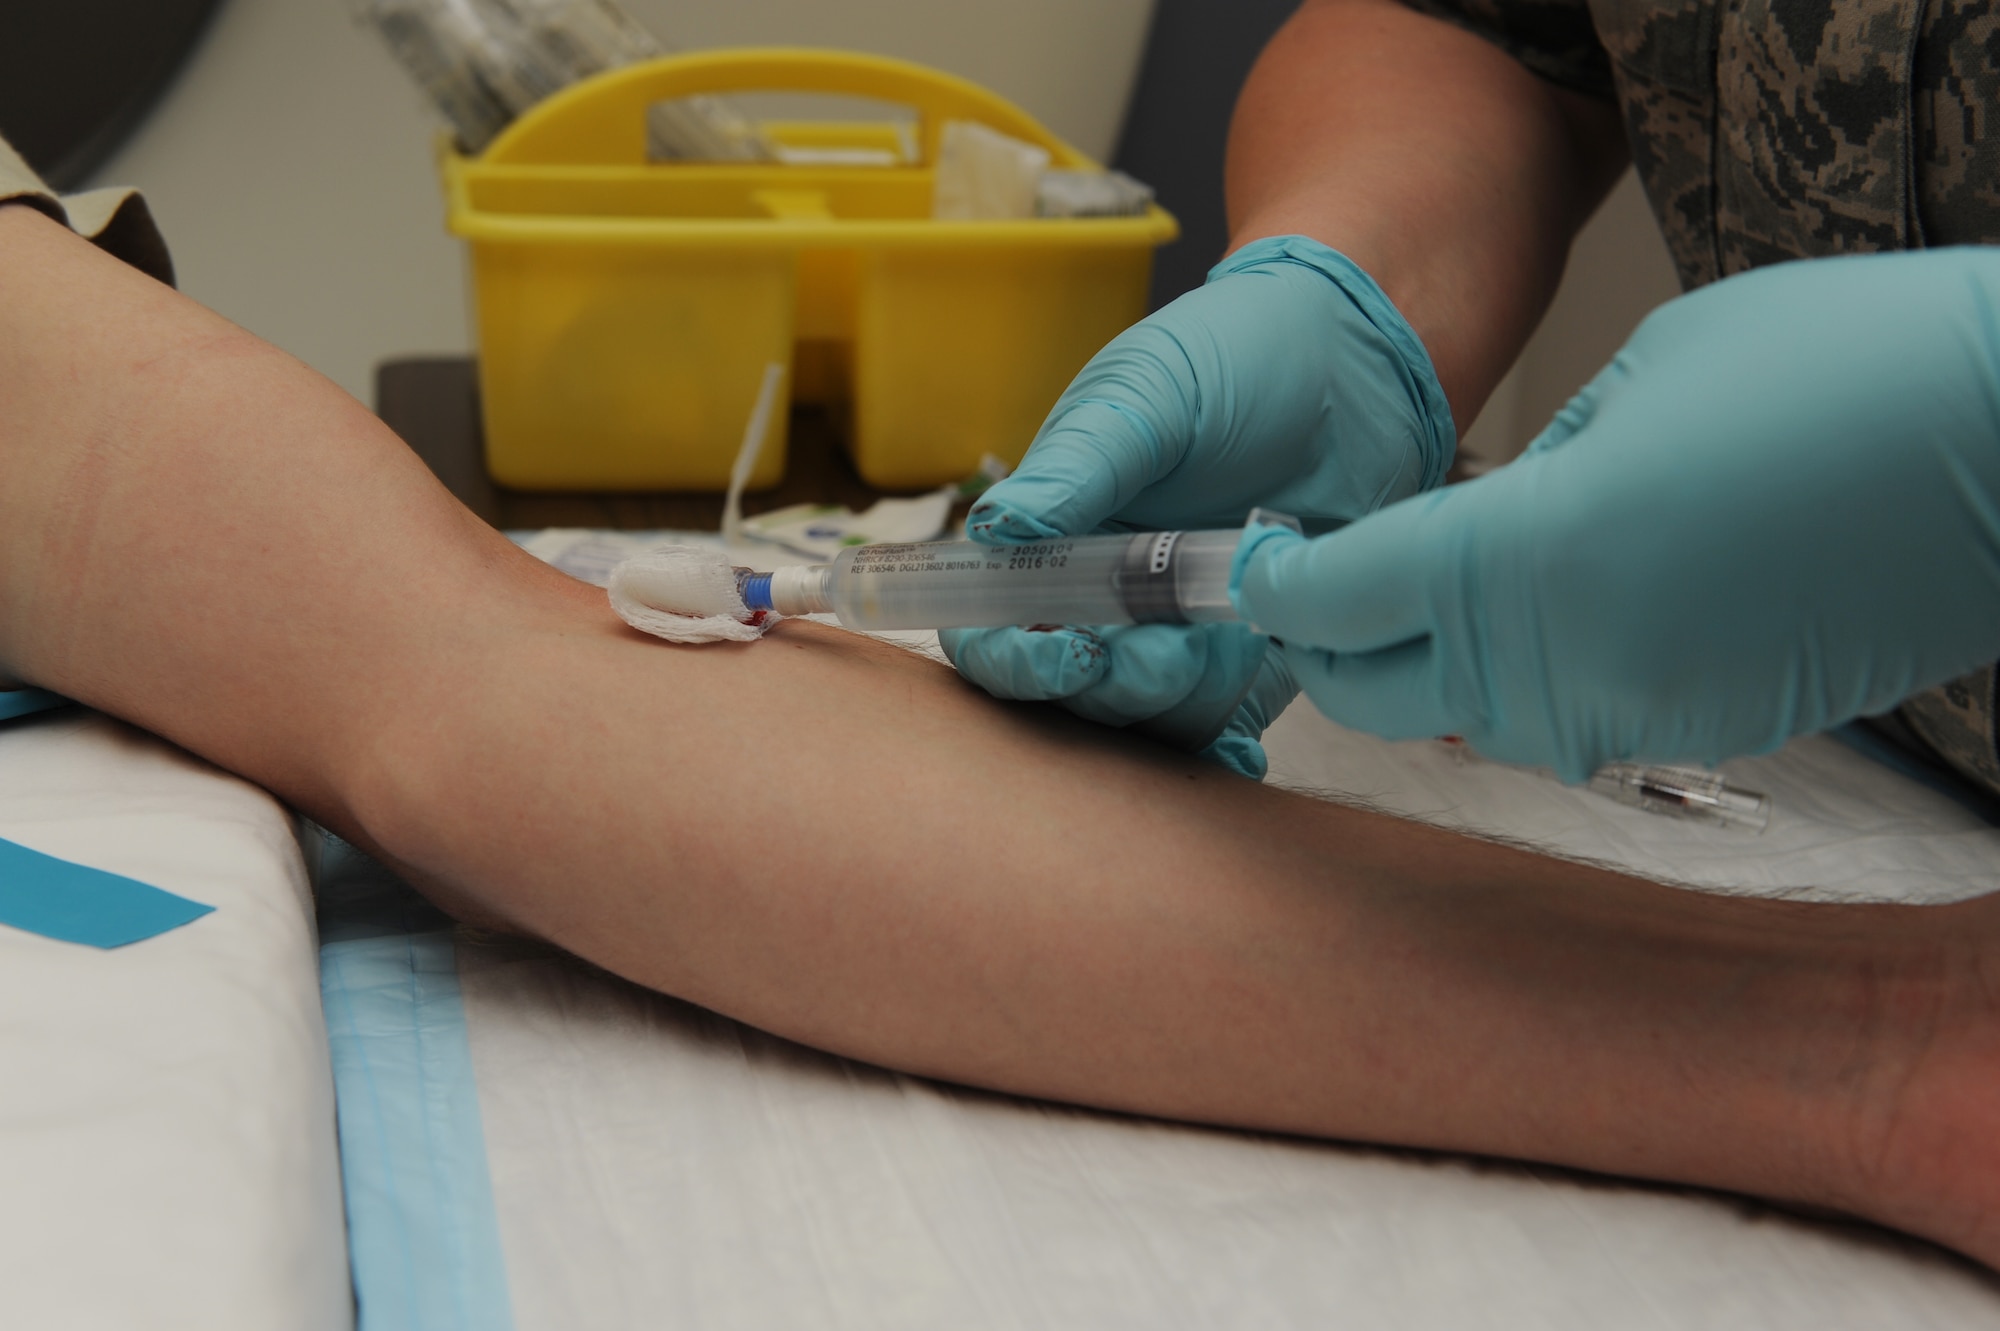 Senior Airman Casey Burch inserts an IV into a patient before going into the CT scan at Scott Air Force Base, Ill., June 3, 2014.  To ensure the IV is inserted properly, Burch checks for flashback, or blood in the tube.  If there is flashback, the catheter can be advanced.  The IV delivers contrast into the patient’s veins in order to highlight certain areas on the body when it is scanned, which makes it easier for the radiologist to see.  Burch is a 375th Medical Support Squadron radiology technologist.  (U.S. Air Force photo by Staff Sgt. Maria Bowman)